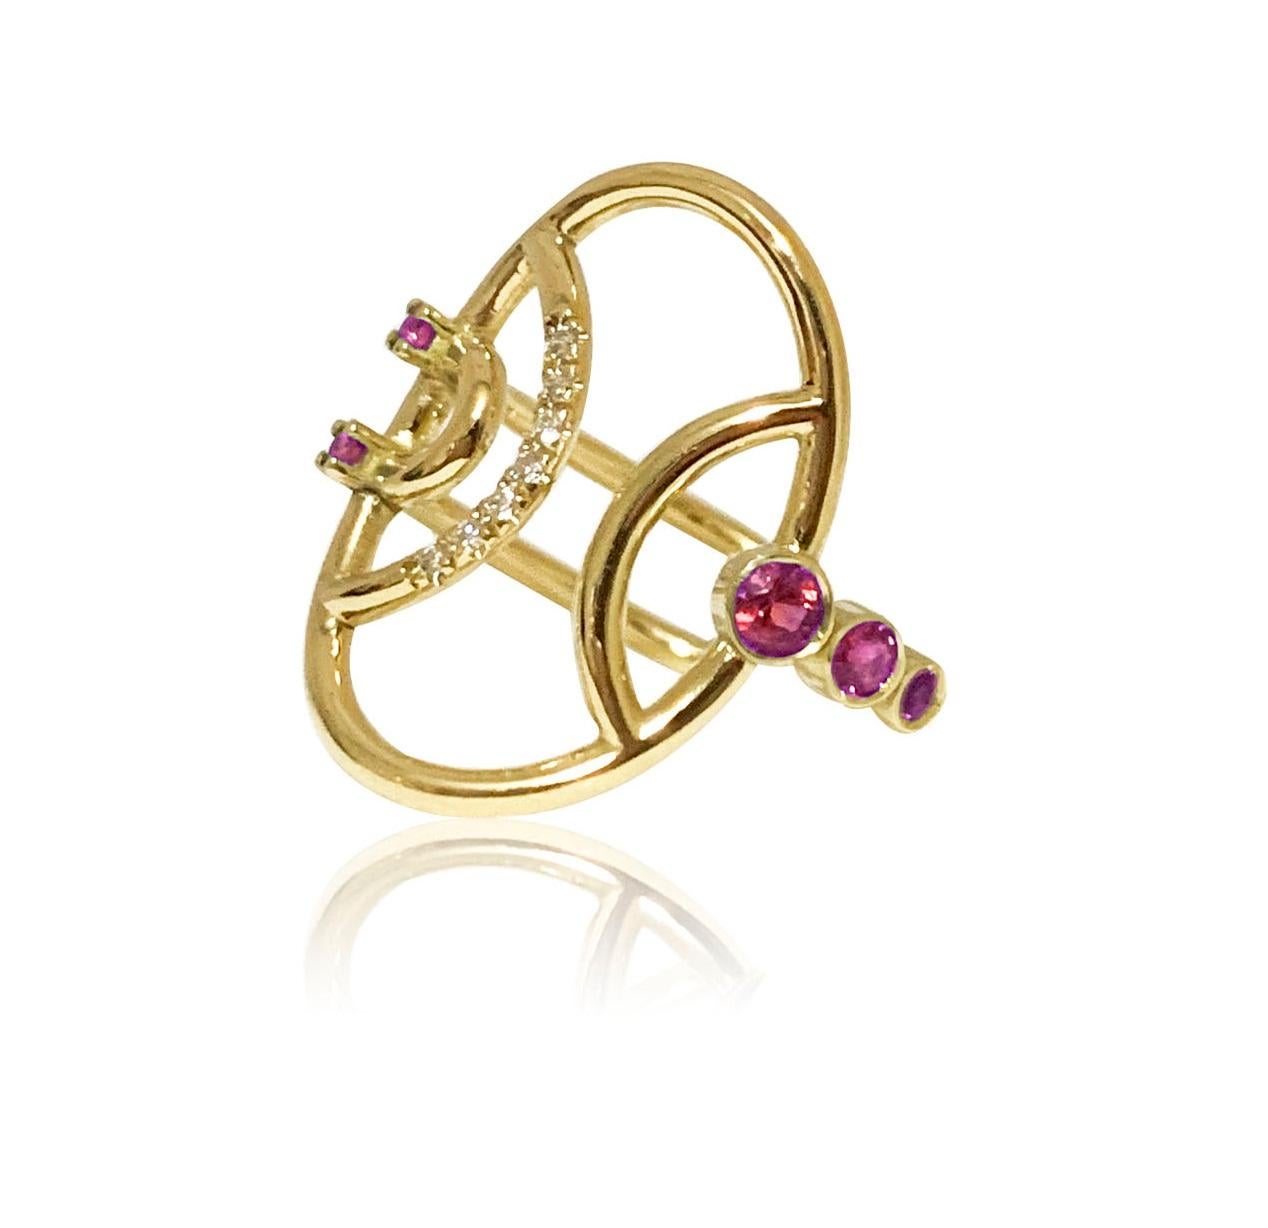 Interlocking Geometry Oval Ring with Rubies and Diamonds in 18 Karat Gold 2